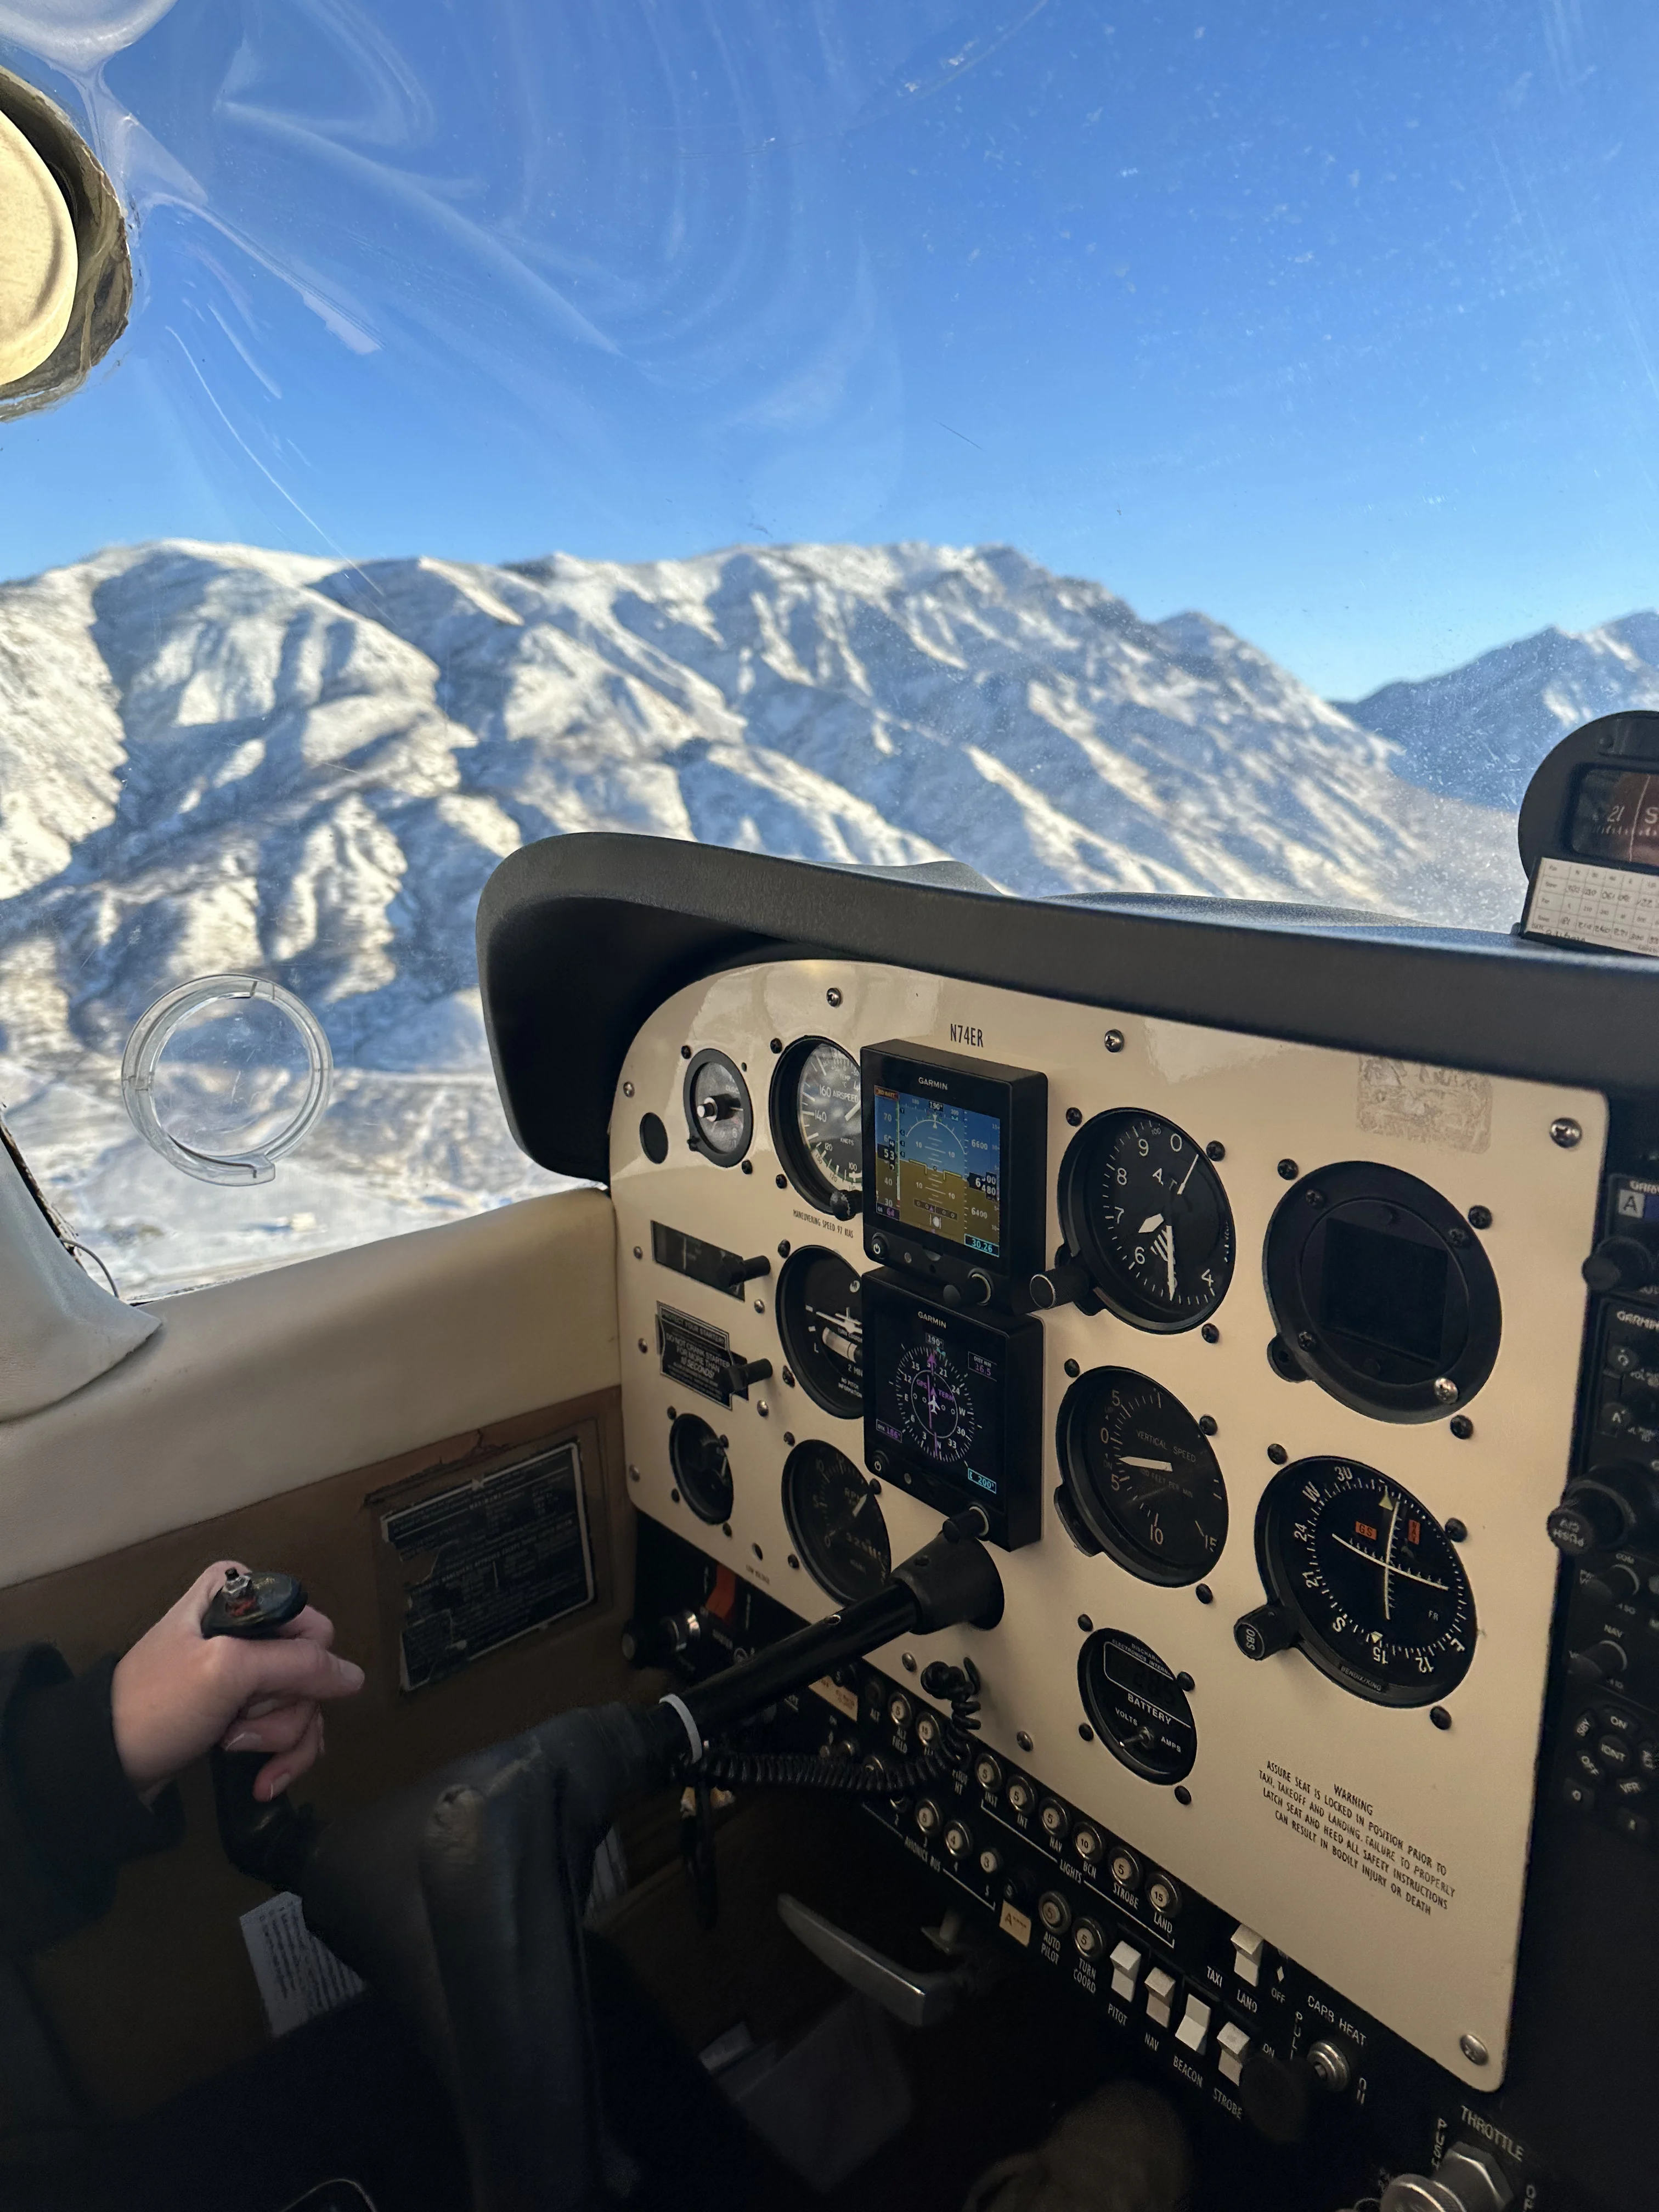 Instrument panel of an aircraft flying over the mountains of Arizona